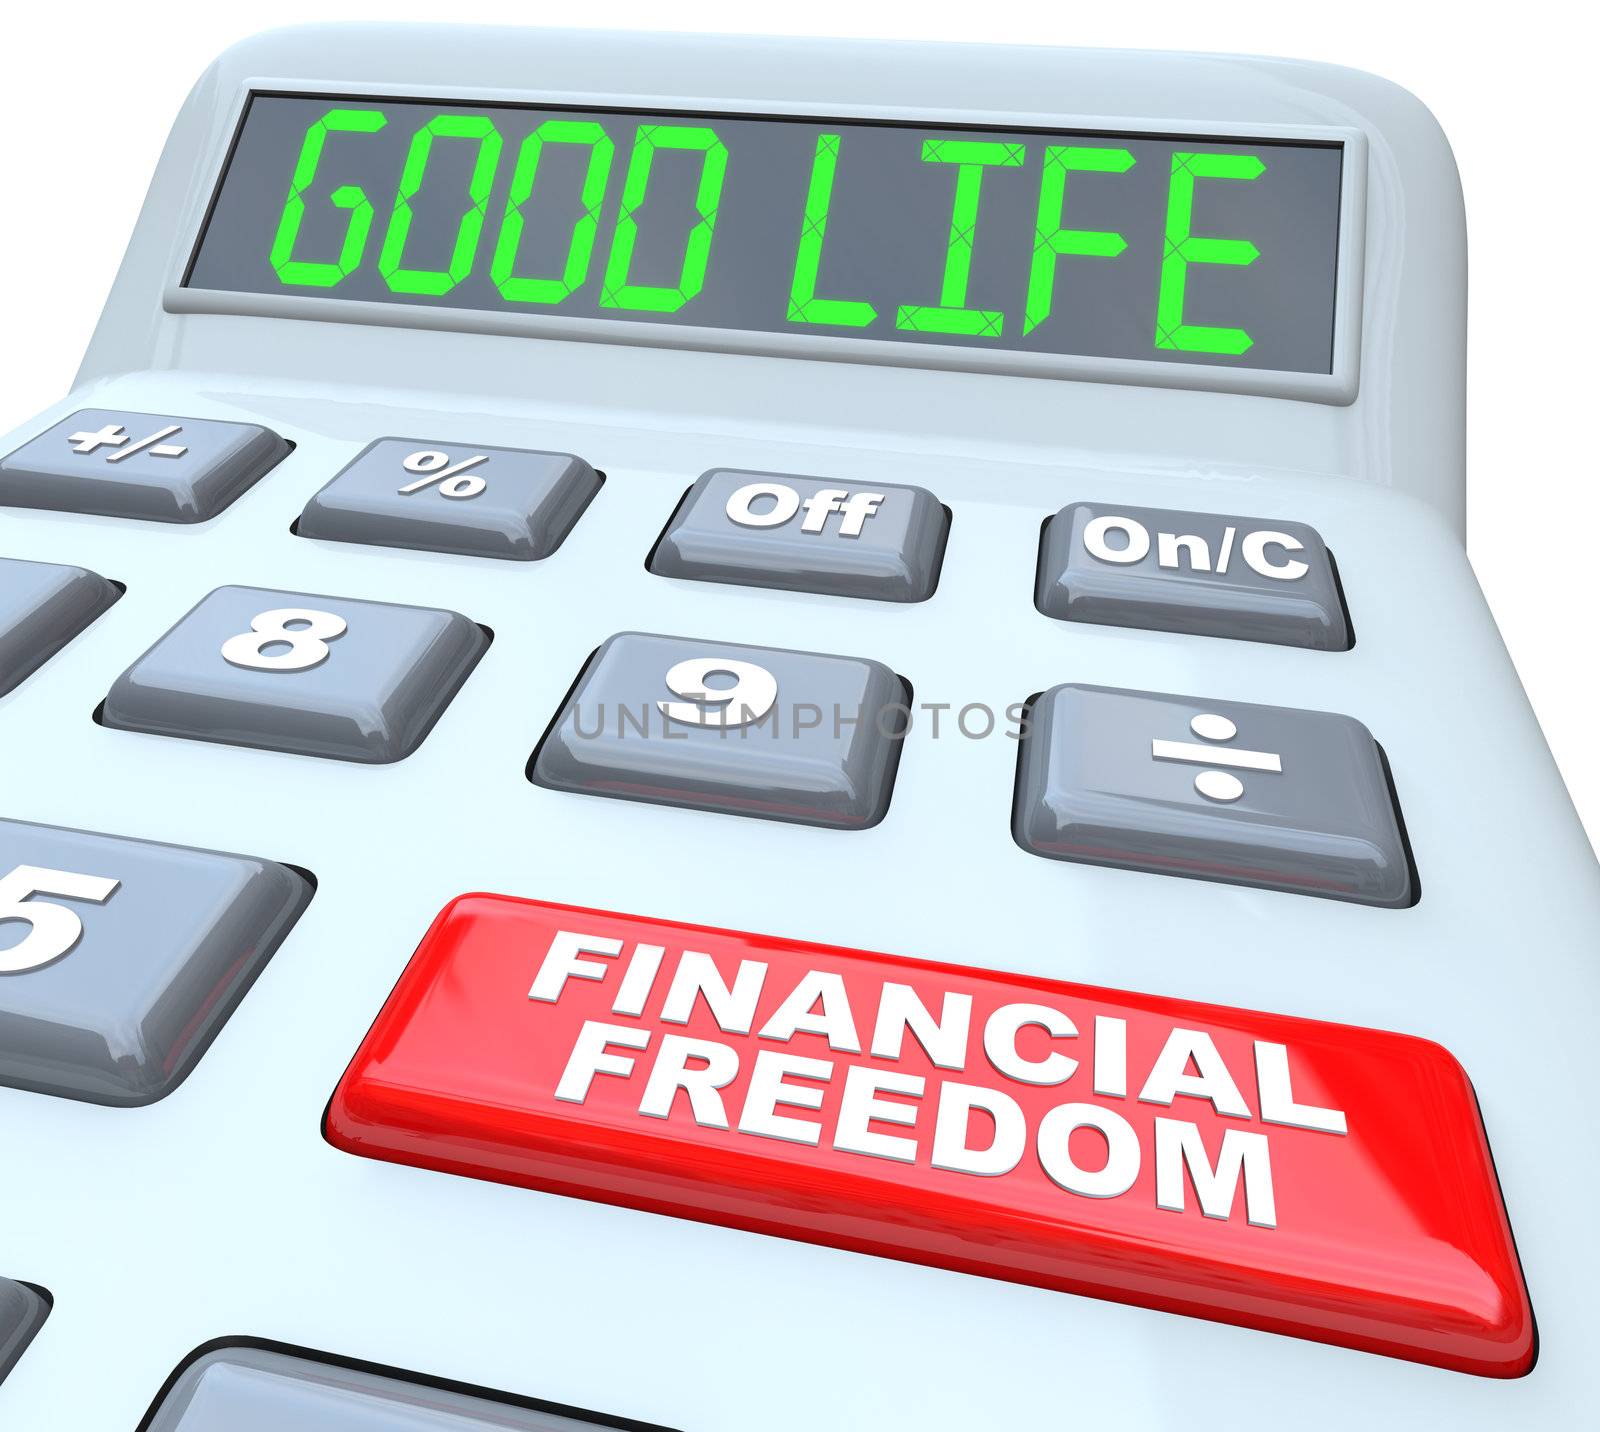 The words Good Life on a calculator digital display, symbolizing being the luxurious lifestyle one can afford when money is no longer a worry, and a red button with the words Financial Freedom